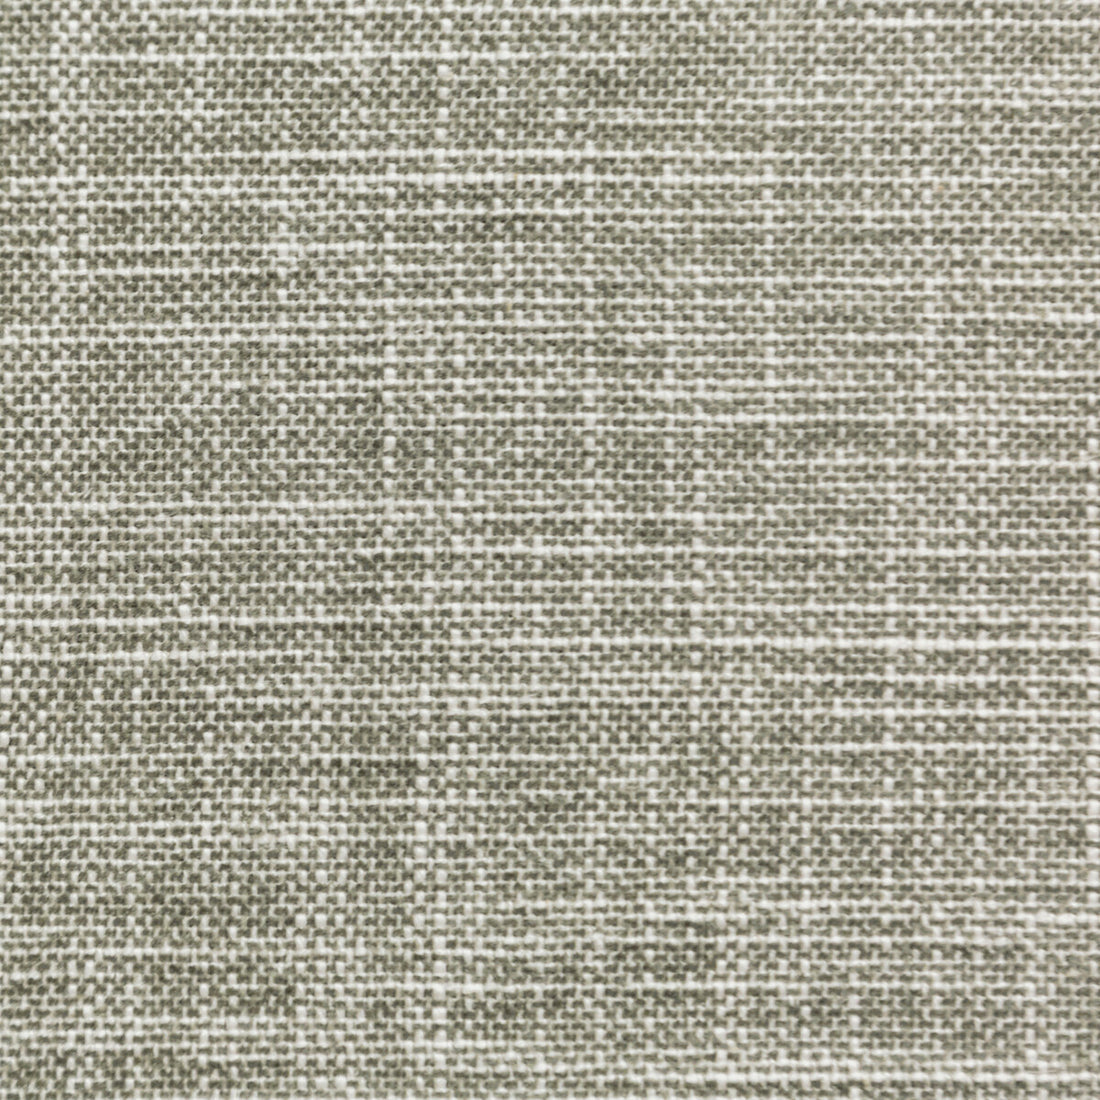 Okanda fabric in stone color - pattern 35768.21.0 - by Kravet Smart in the Performance Kravetarmor collection